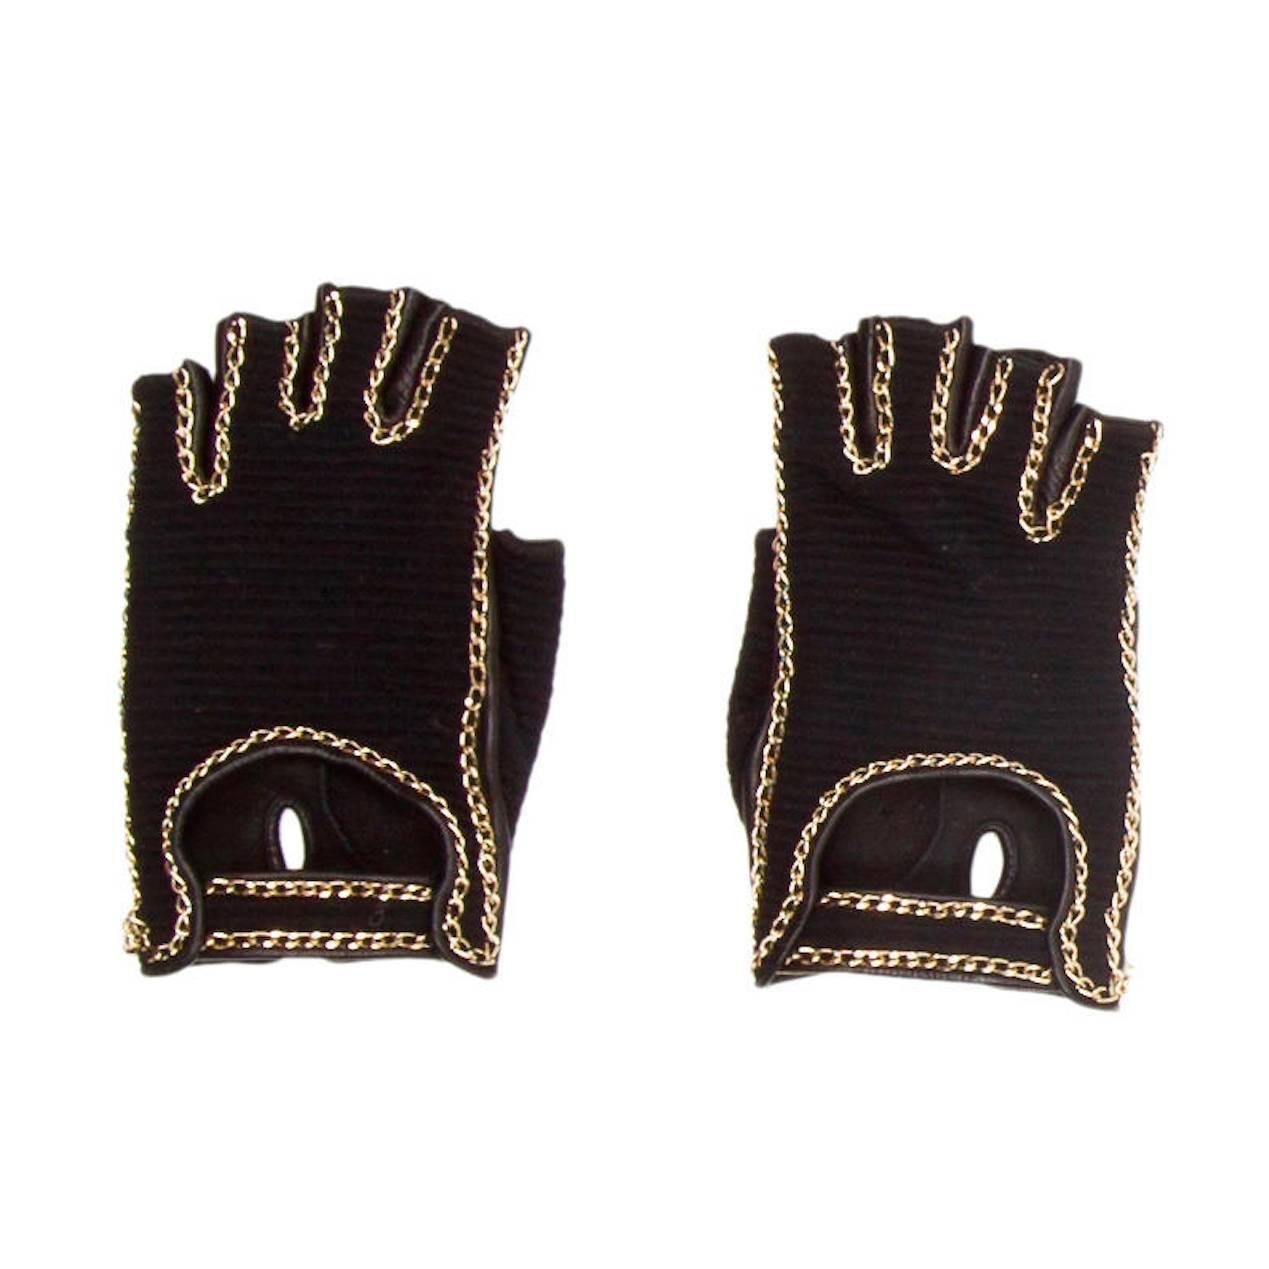 Show-Stopping Chanel Fingerless Gloves With Chain Trim, 2011 at 1stDibs